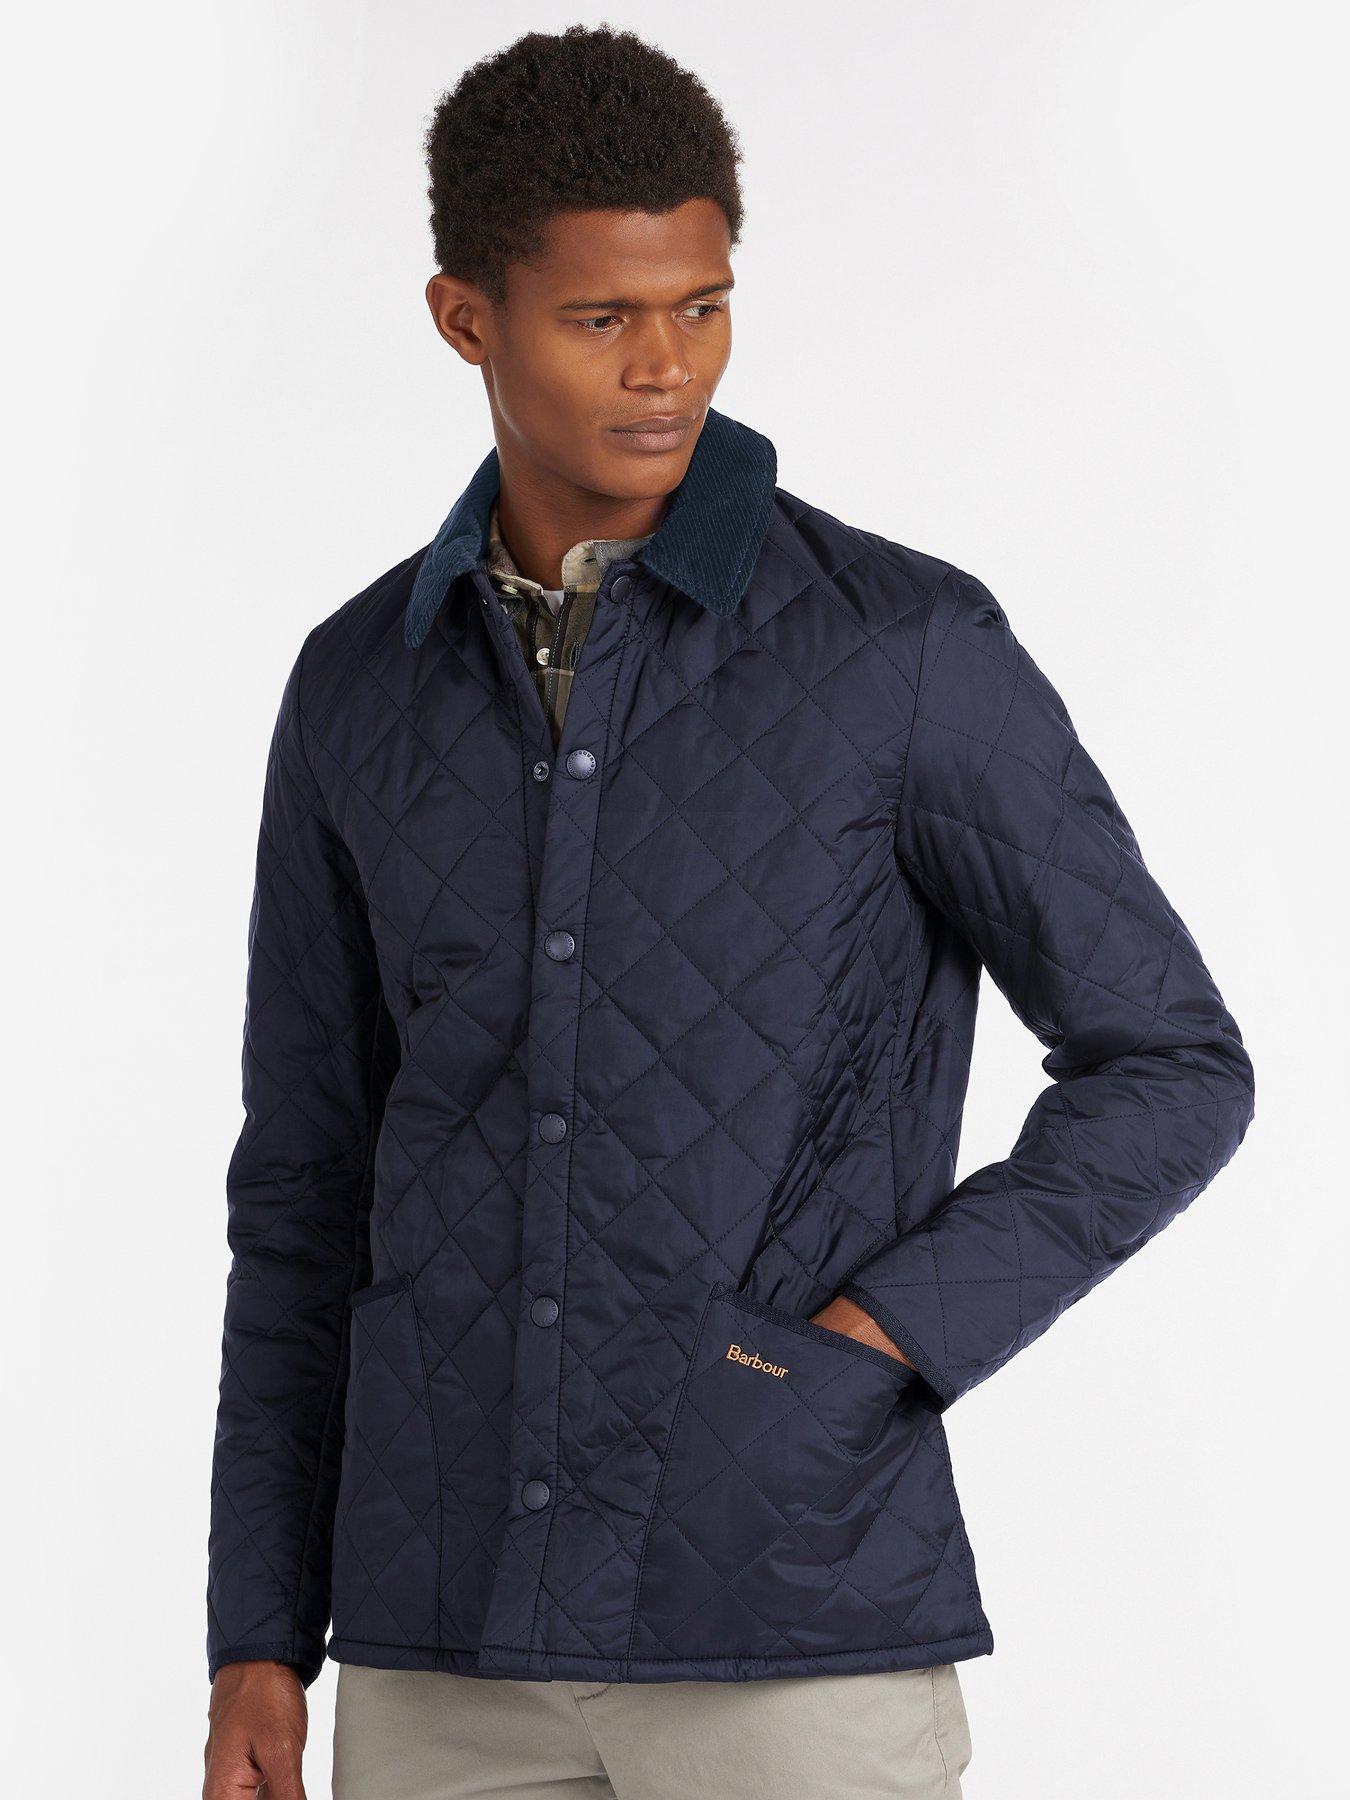 very exclusive barbour